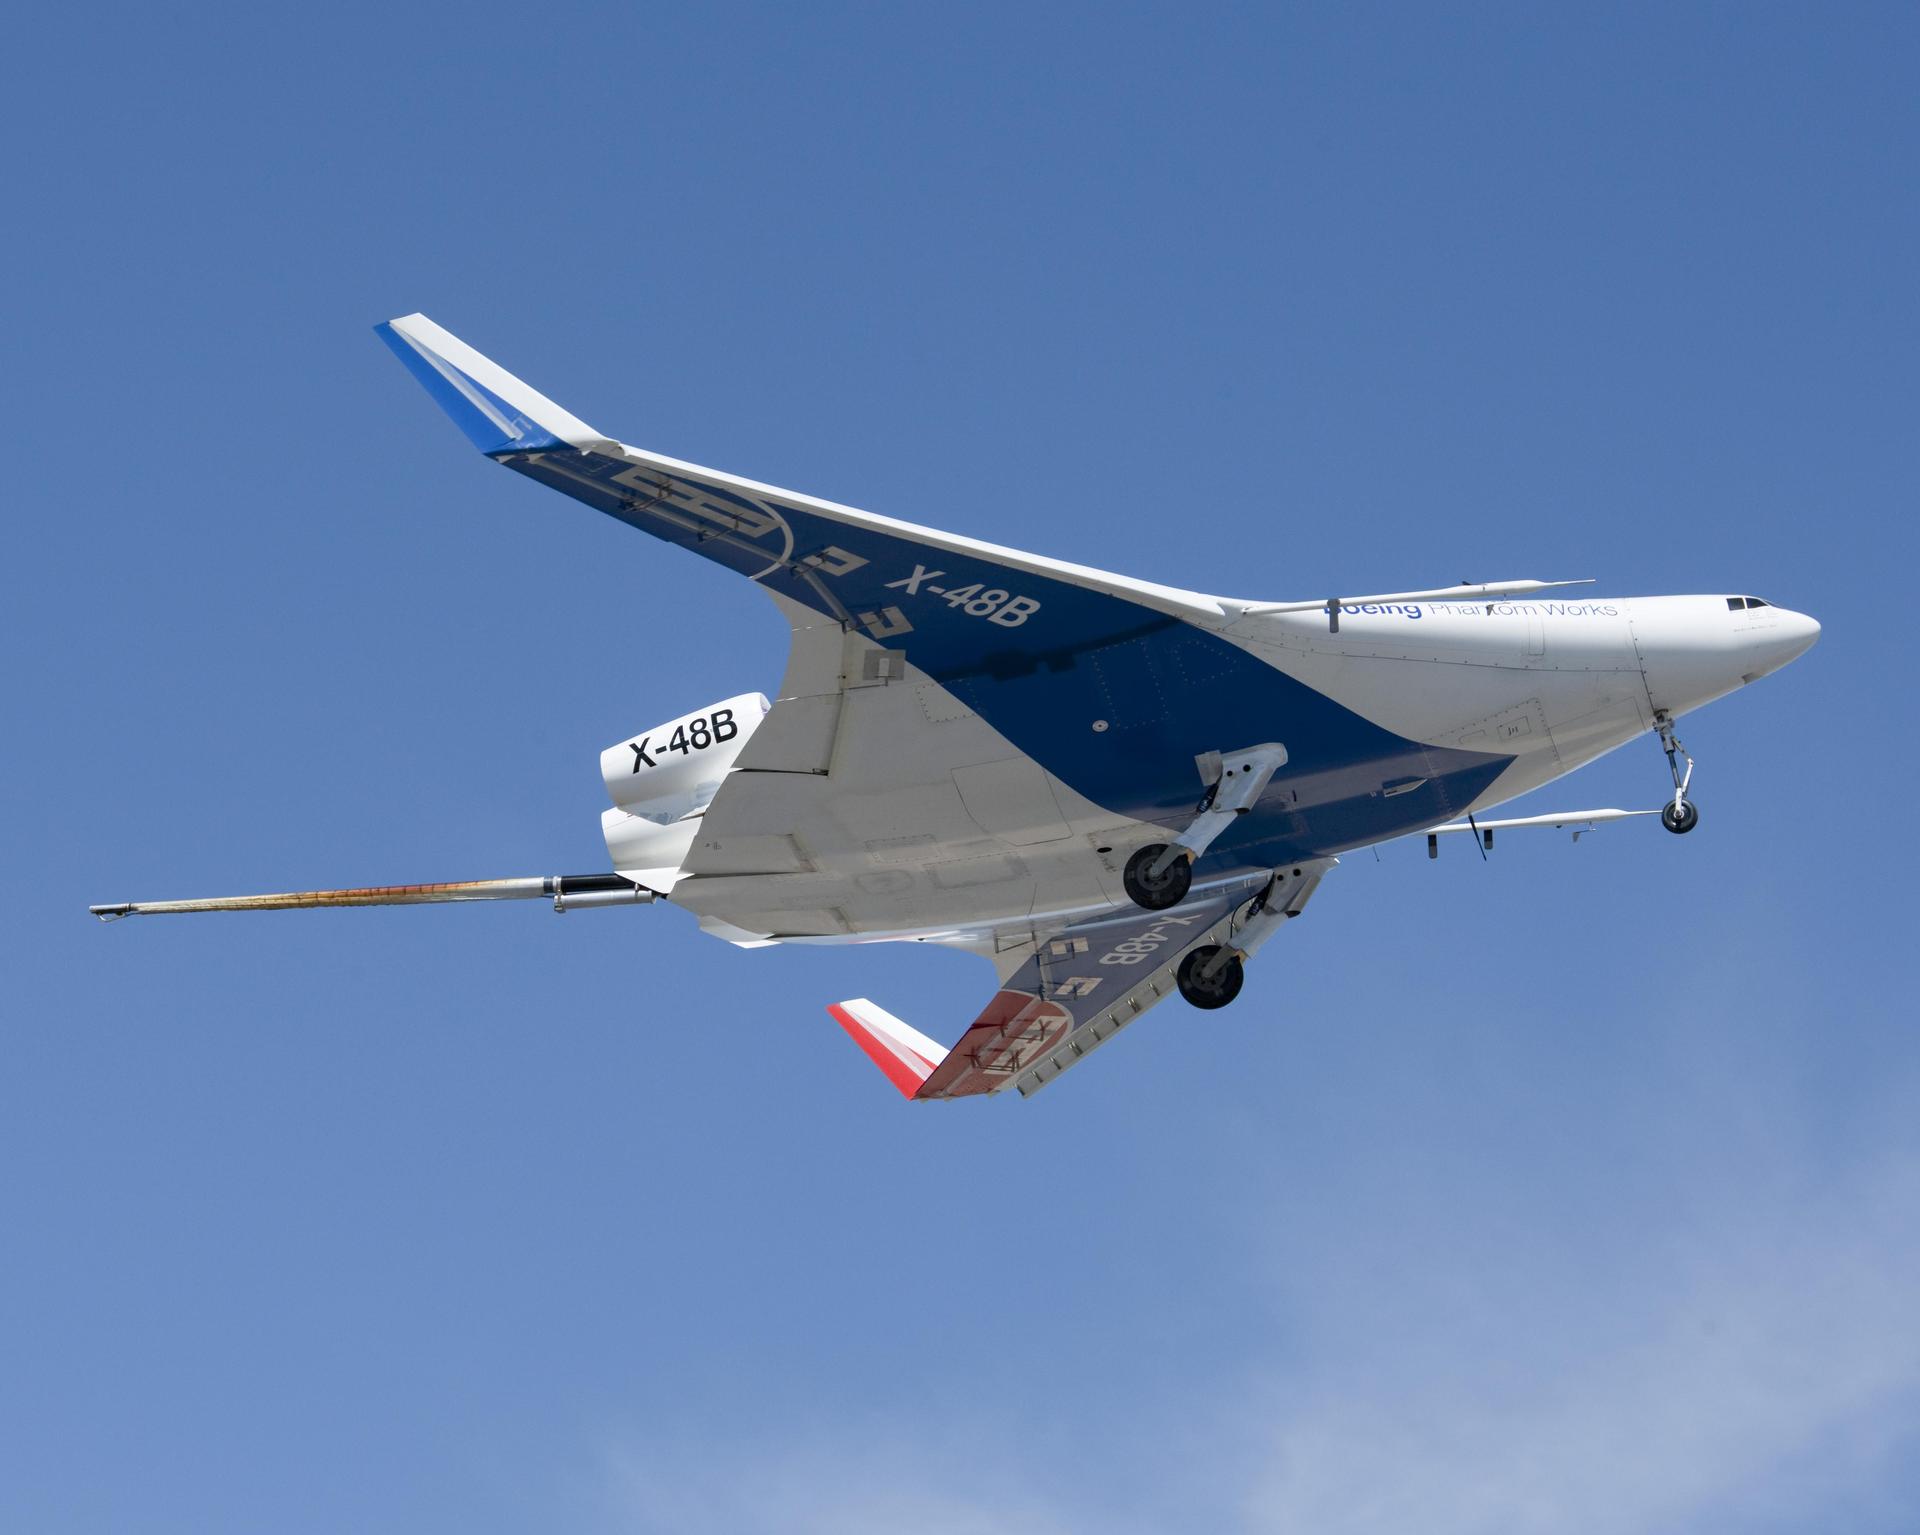 A joint NASA/Boeing team completed the first phase of flight tests on March 19, 2010.